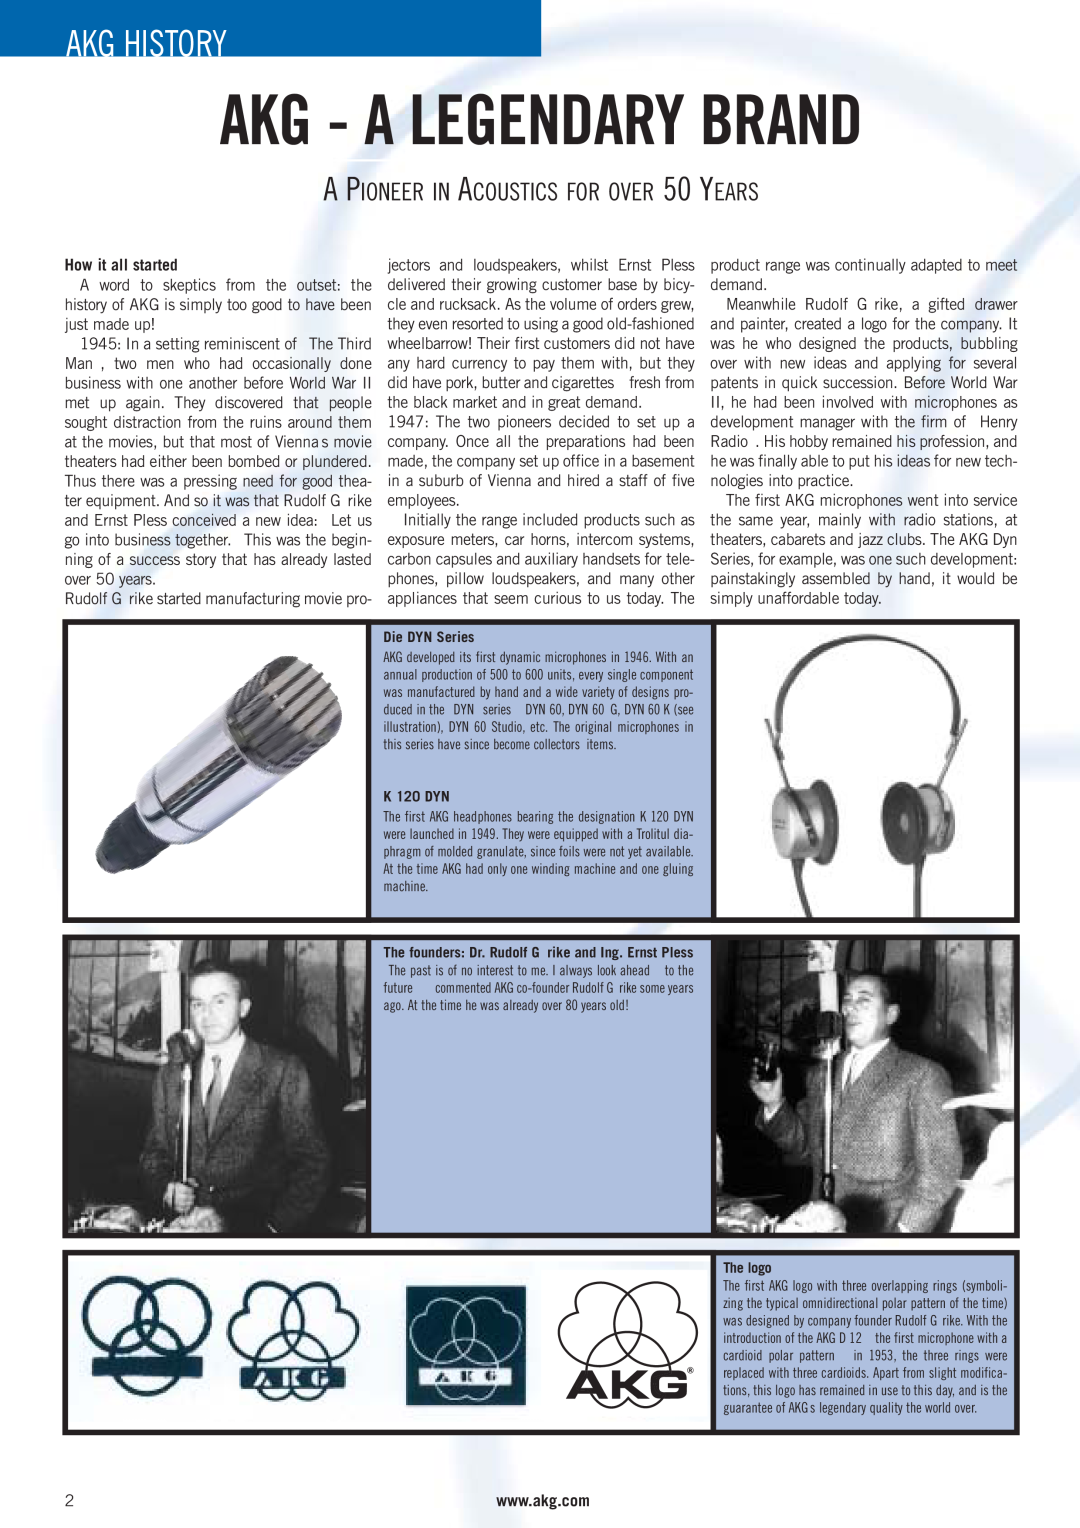 AKG Acoustics WMS 40 manual Akg - A Legendary Brand, Akg History, A PIONEER IN ACOUSTICS FOR OVER 50 YEARS, Die DYN Series 